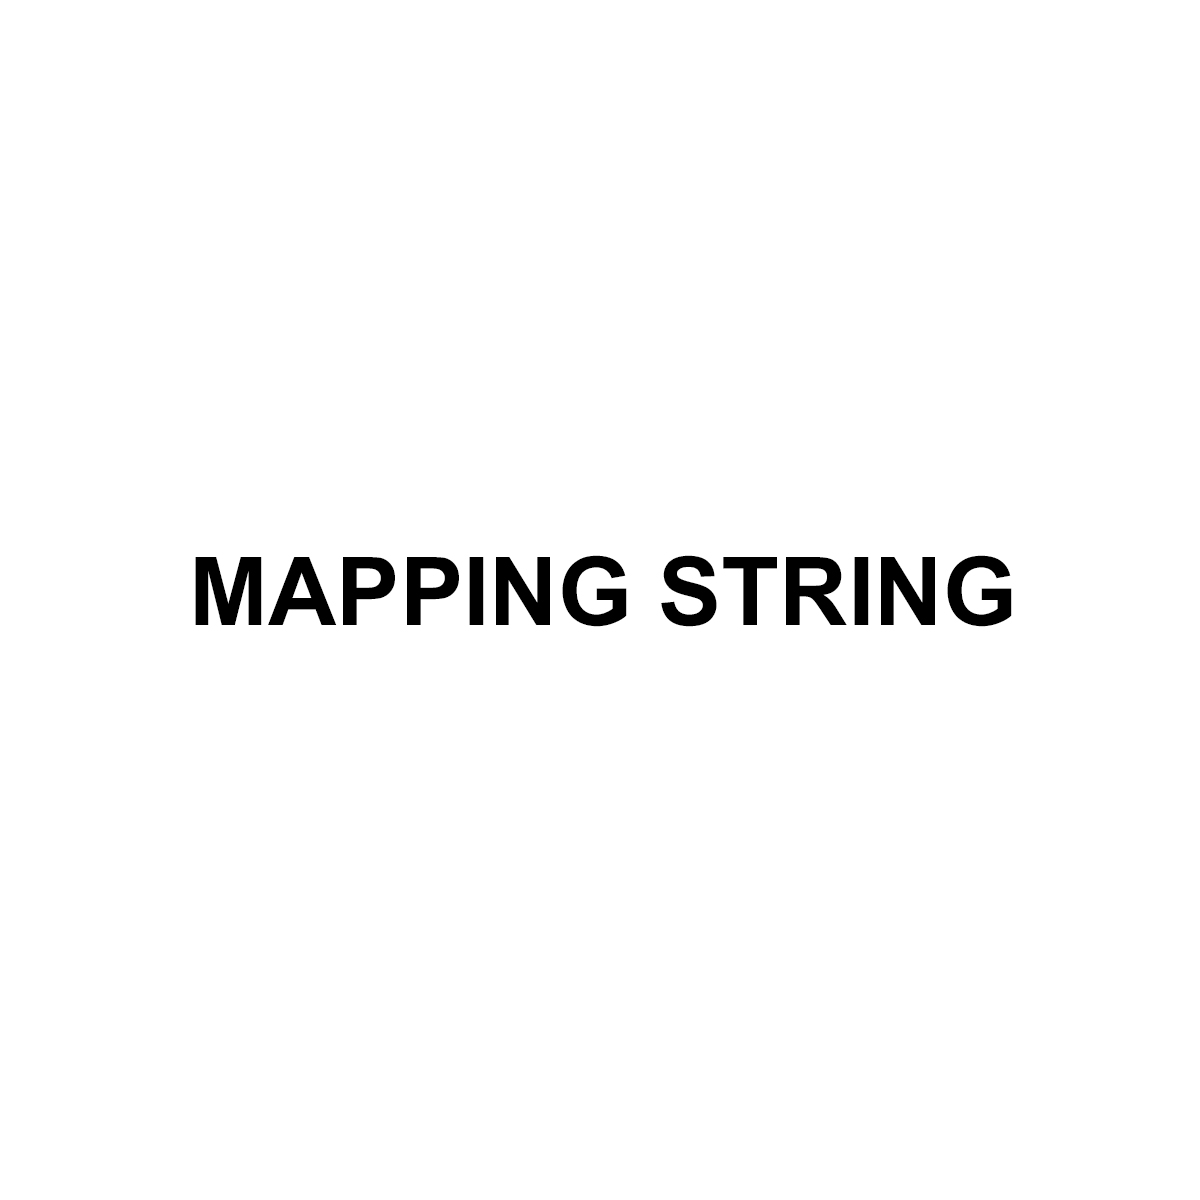 Mapping String